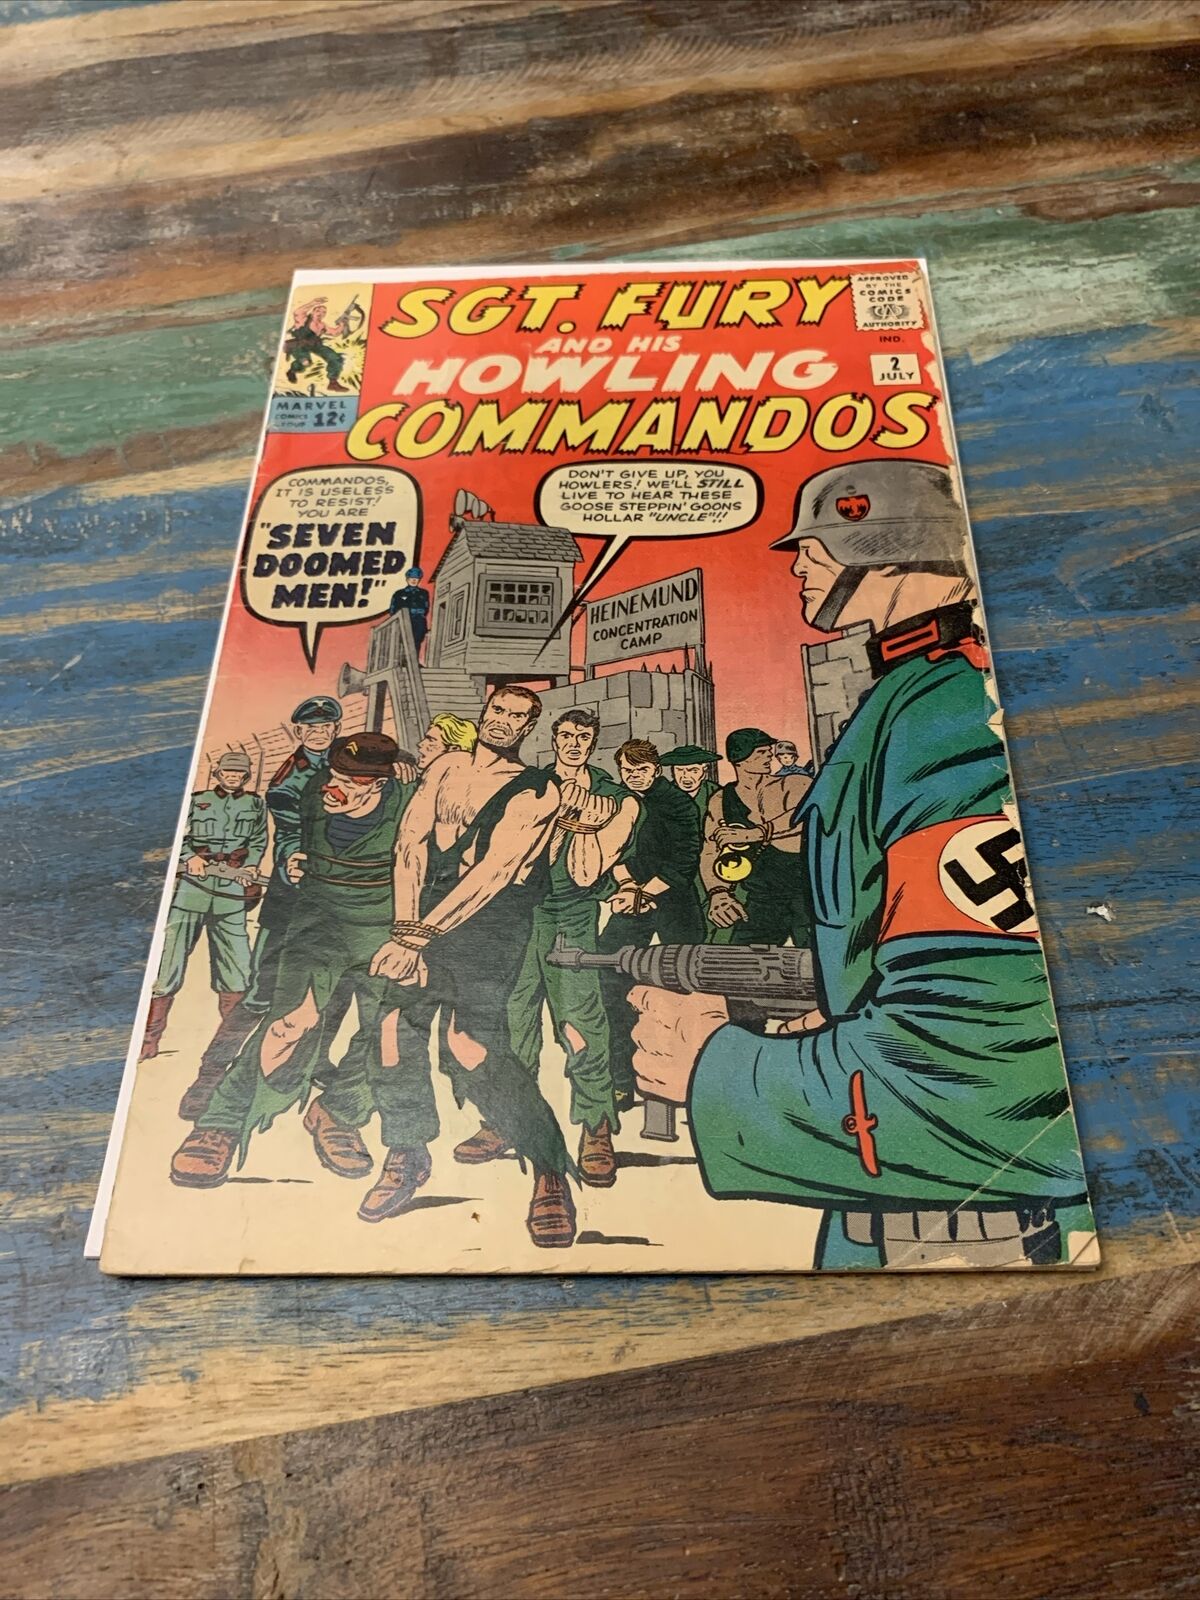 Sgt. Fury and His Howling Commandos #2 - Nice Copy - Marvel 1963